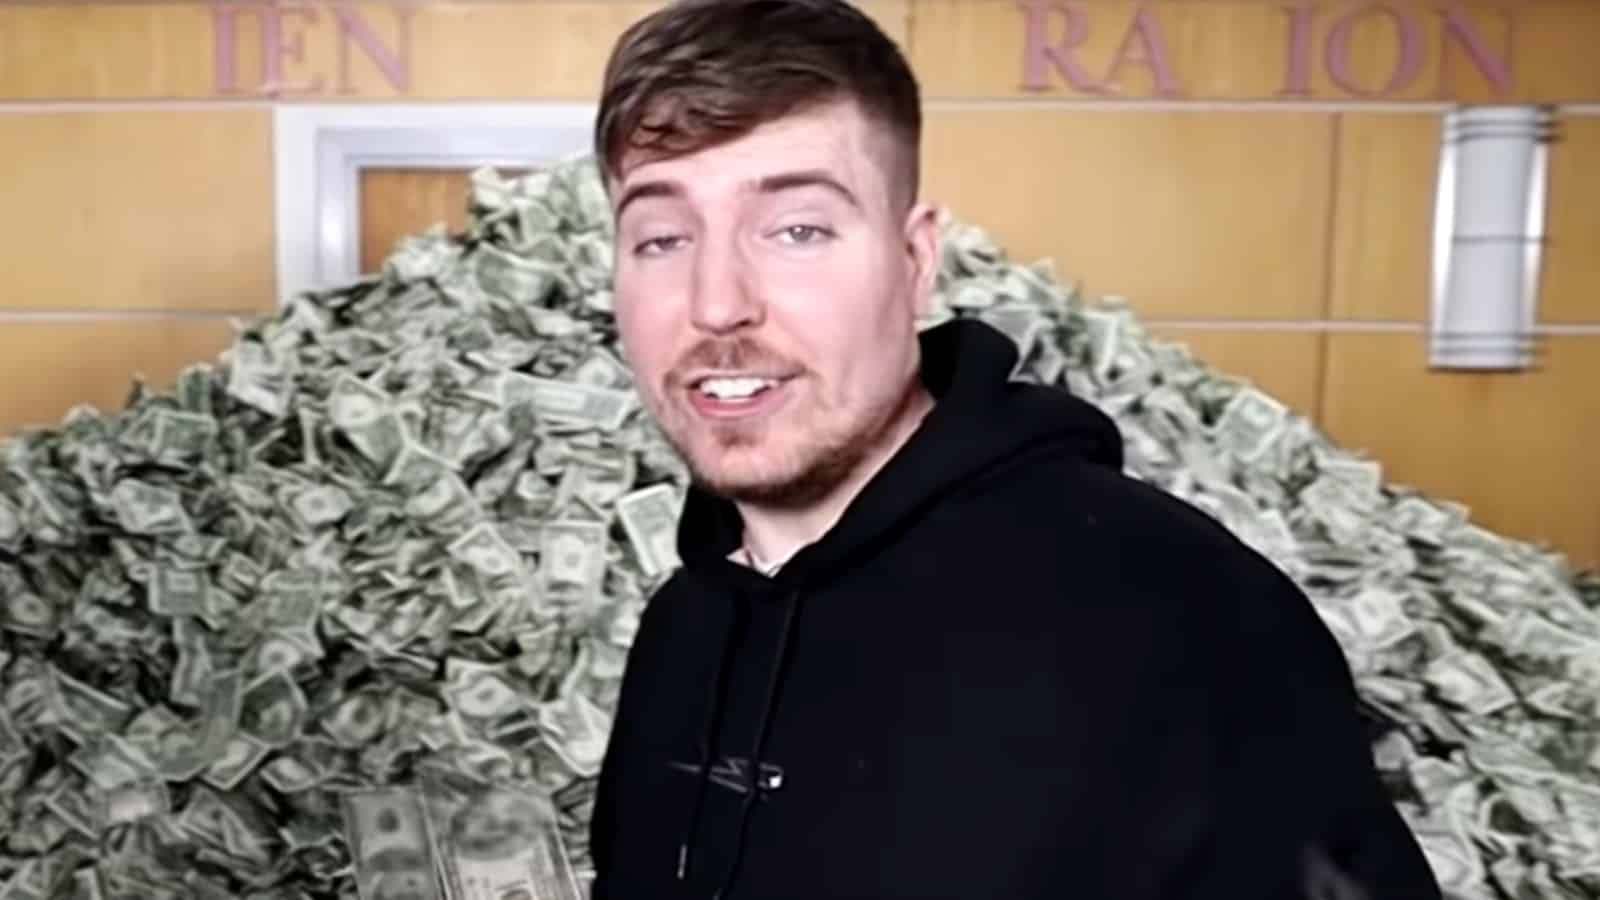 Fortnite and MrBeast will give away $1 million in a pop-up game challenge